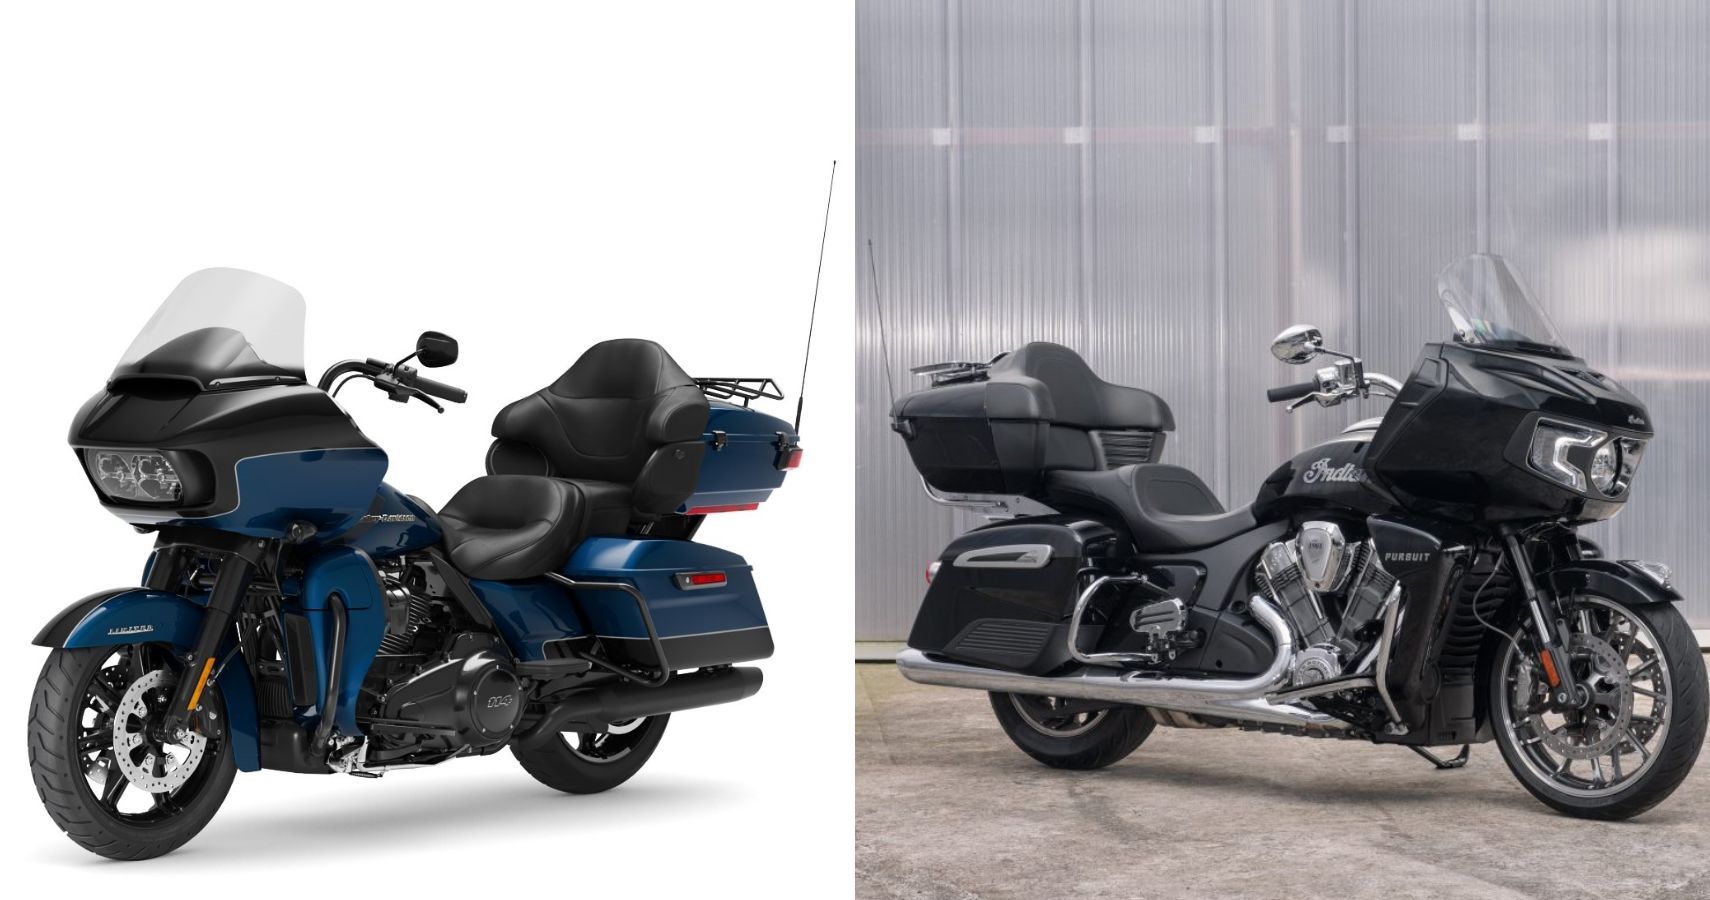 2022 Harley-Davidson Road Glide Limited and Indian Pursuit Limited Premium side-by-side comparison view